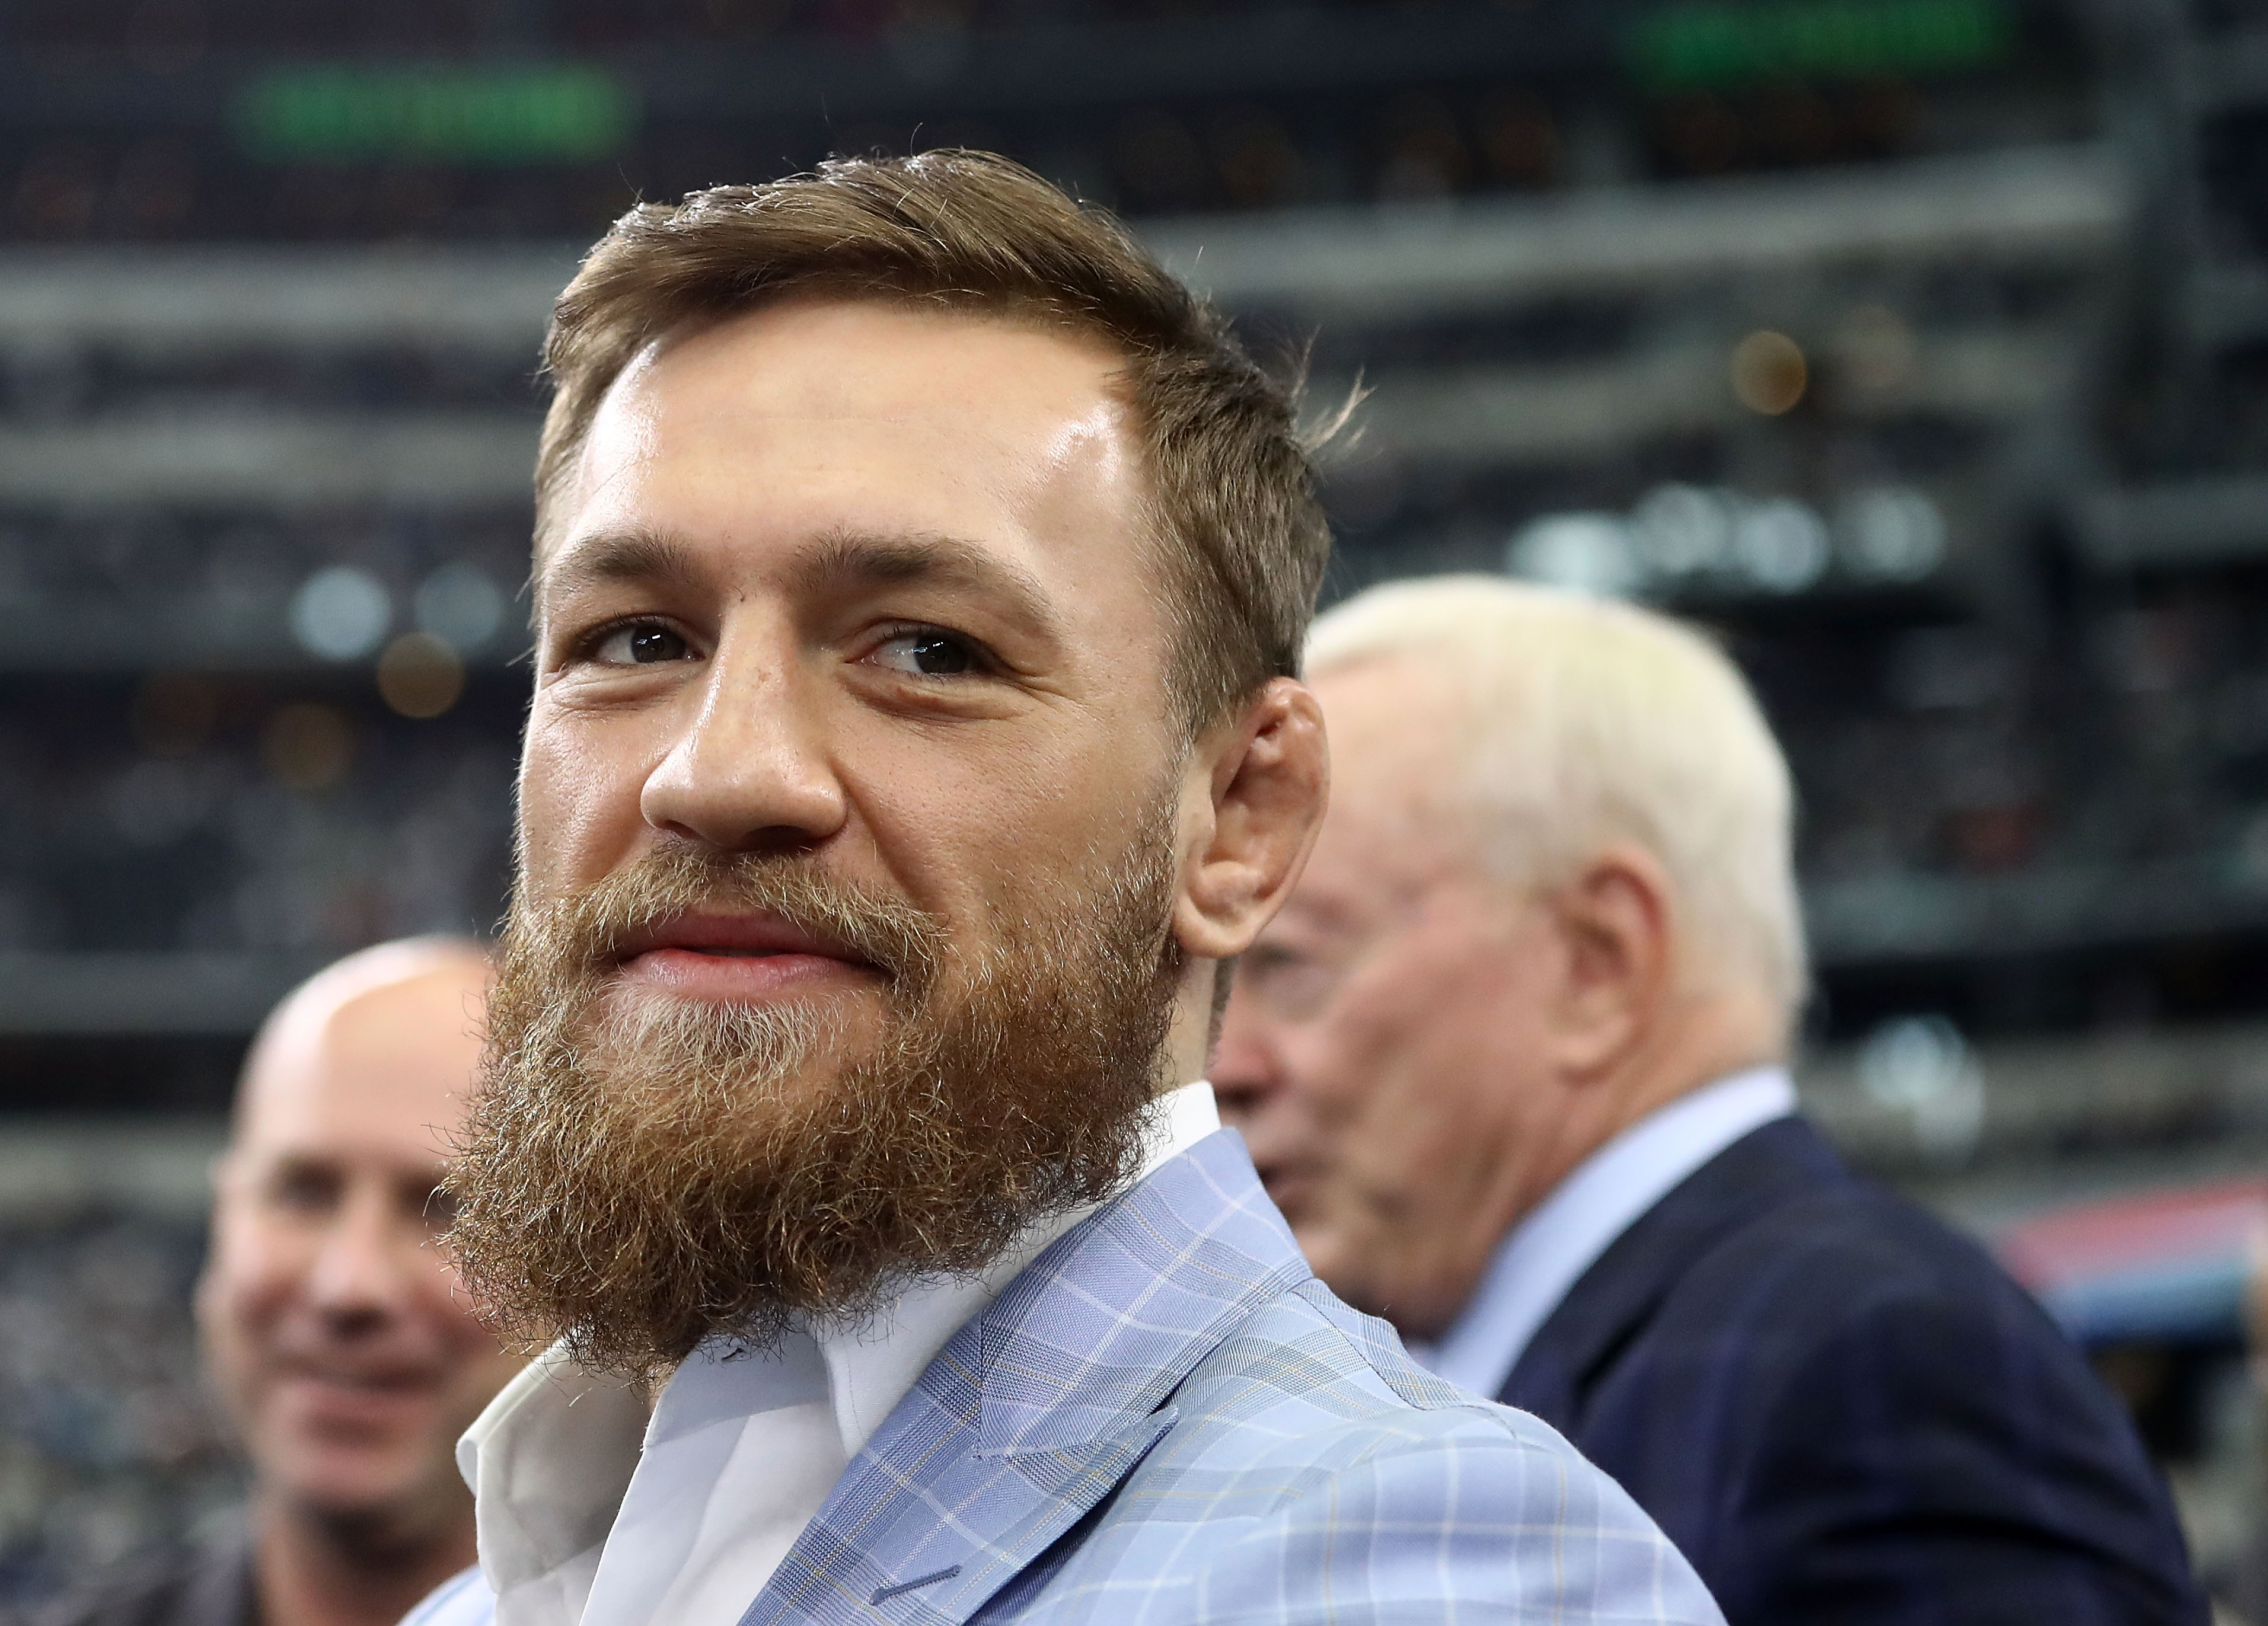 Conor McGregor is seen on the sidelines before the NFL game between the Jacksonville Jaguars and Dallas Cowboys at AT&T Stadium on October 14, 2018 in Arlington, Texas. (Ronald Martinez—Getty Images)